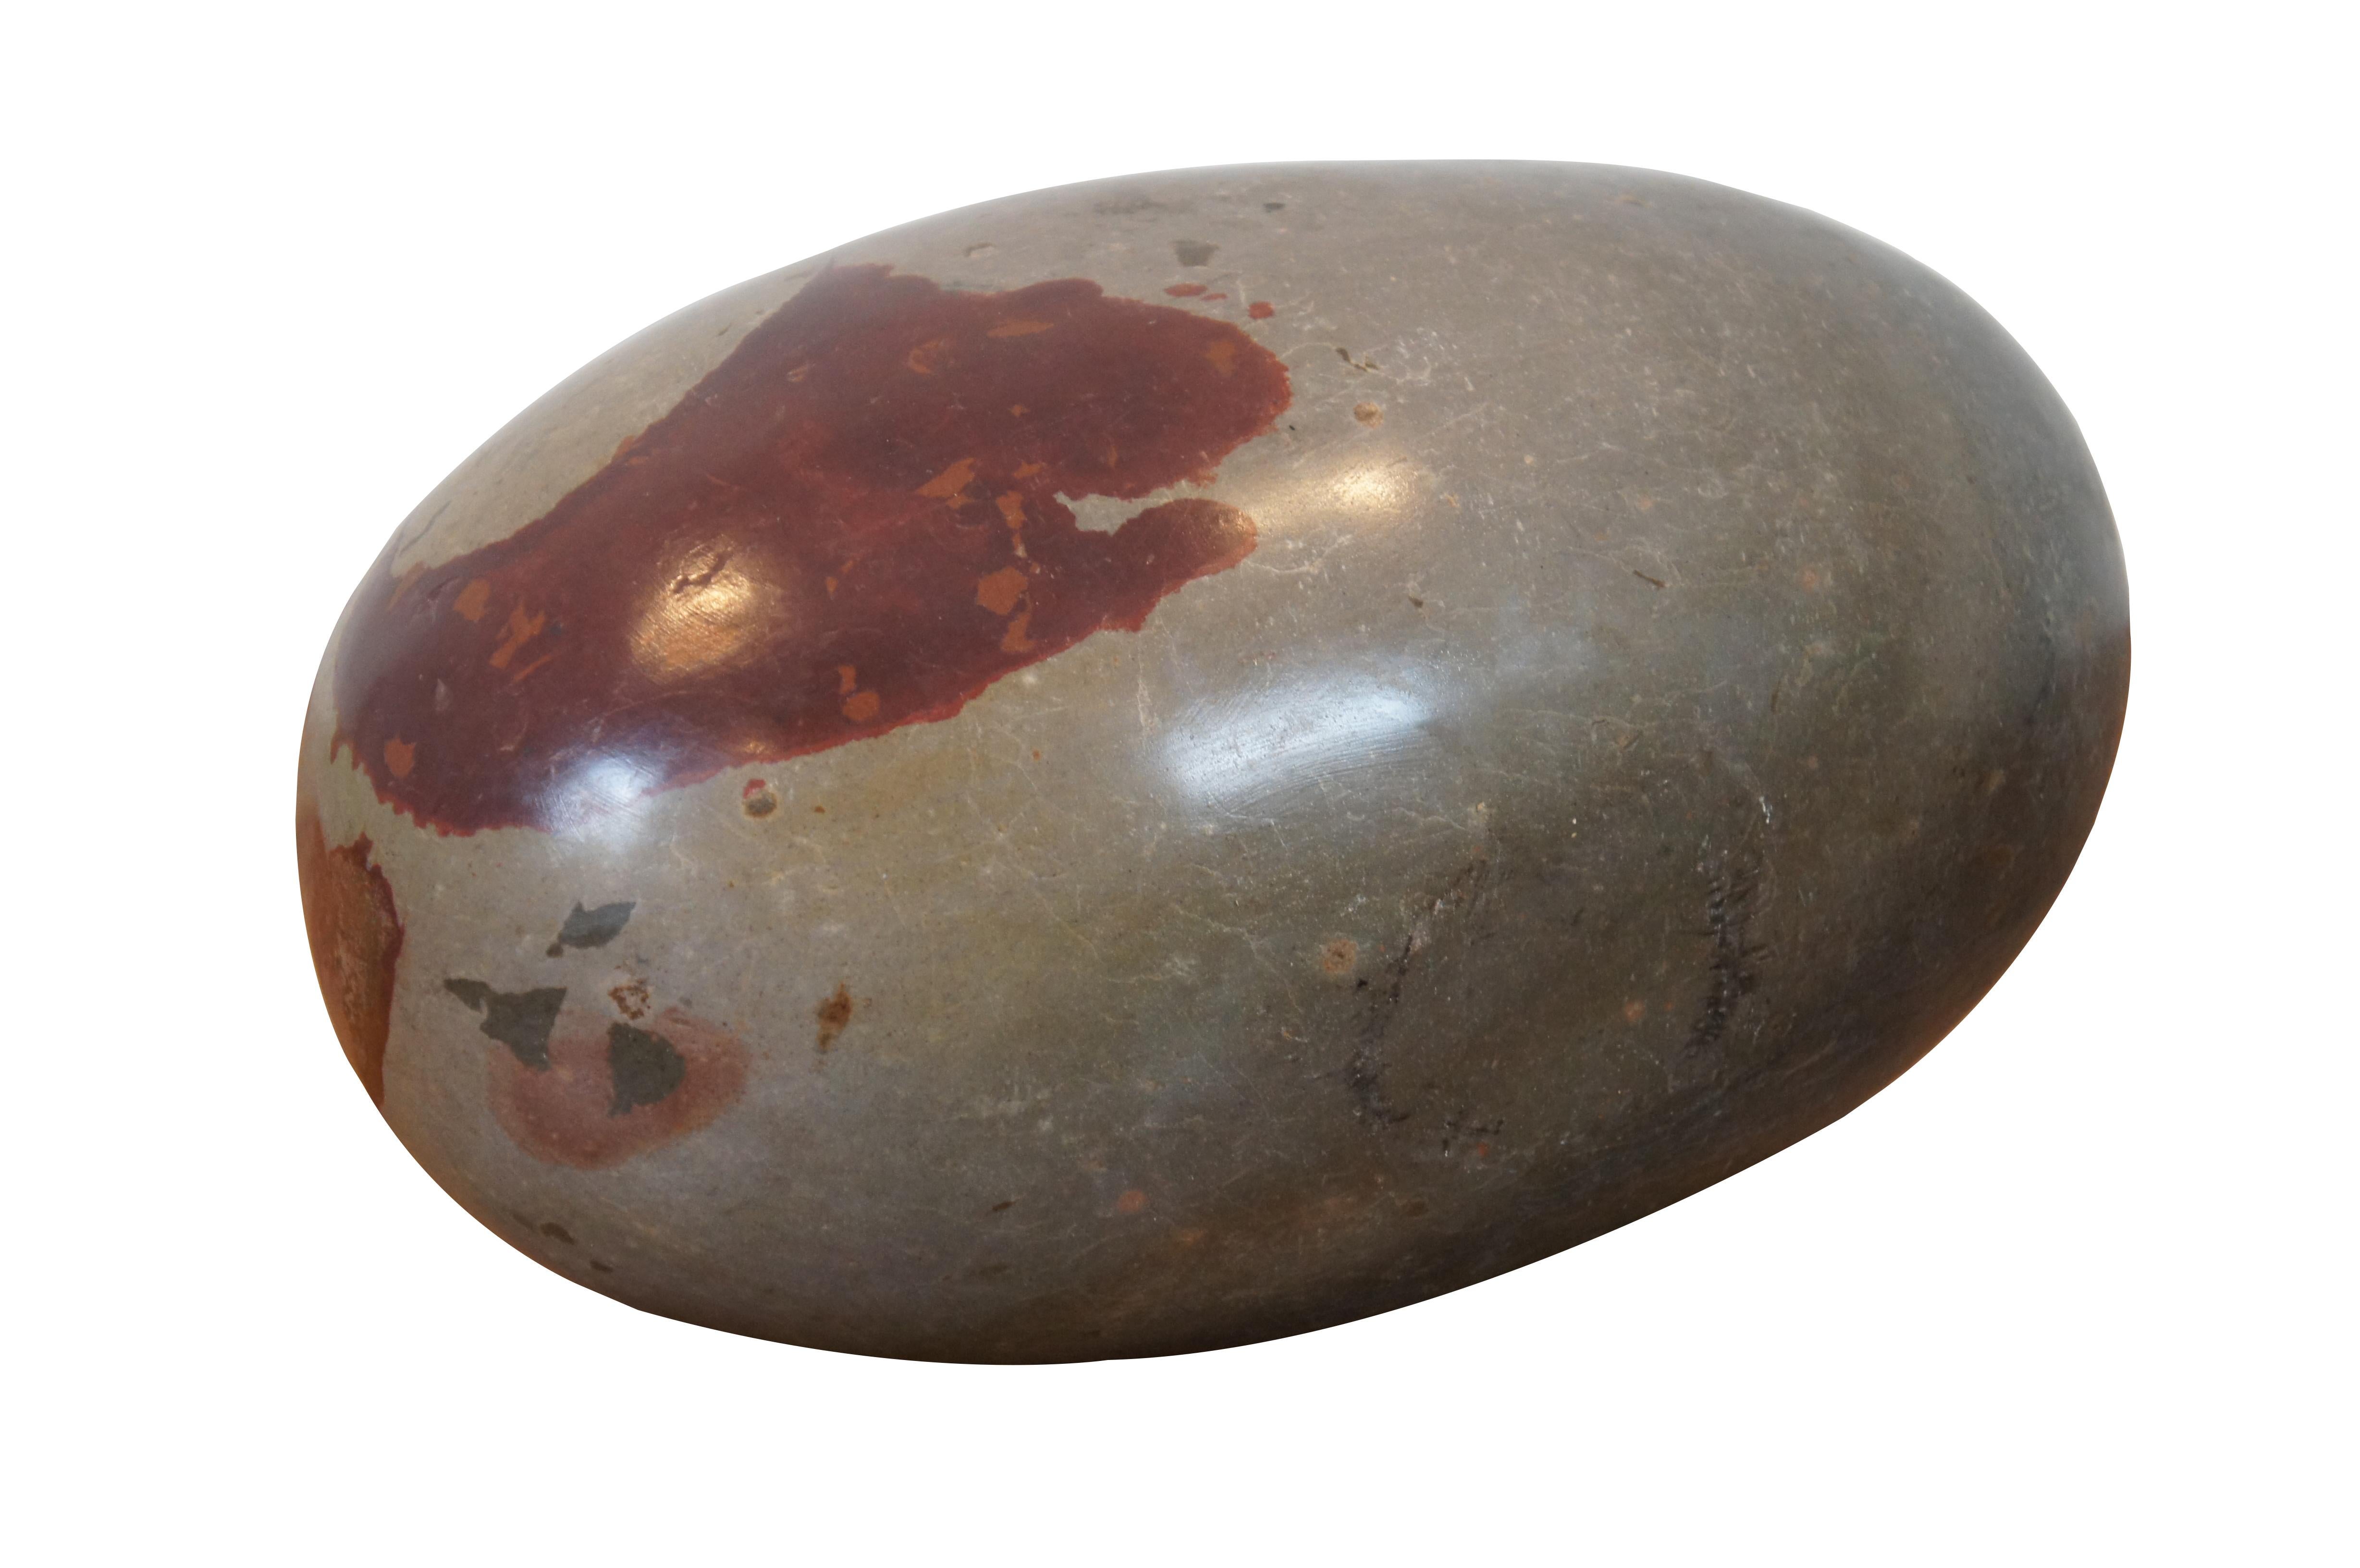 Shiva Lingam is a crypto-crystalline member of the Quartz family. This heavy stone is found in only one of seven sacred Indian rivers. Villagers visit the Narmada River in Onkar Mandhata and polish these river rocks to better define their famed